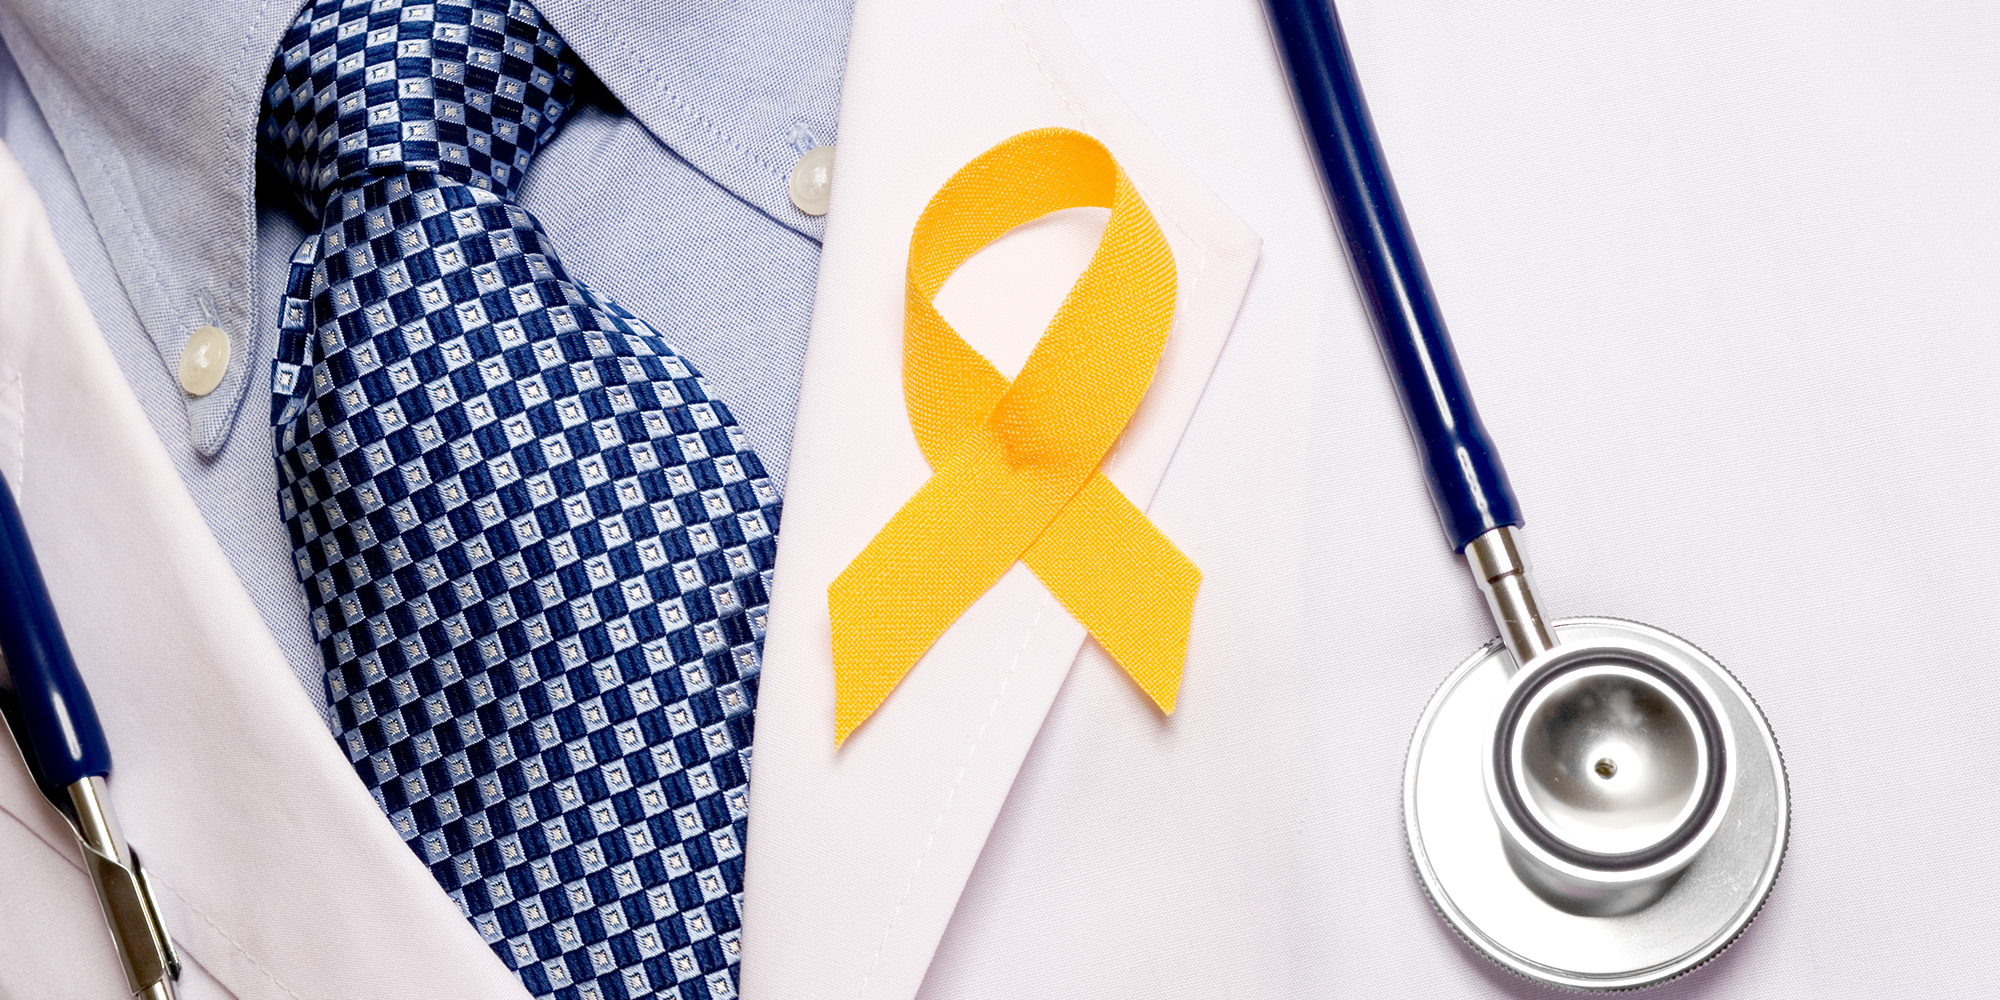 Sarcoma Awareness Month is in July